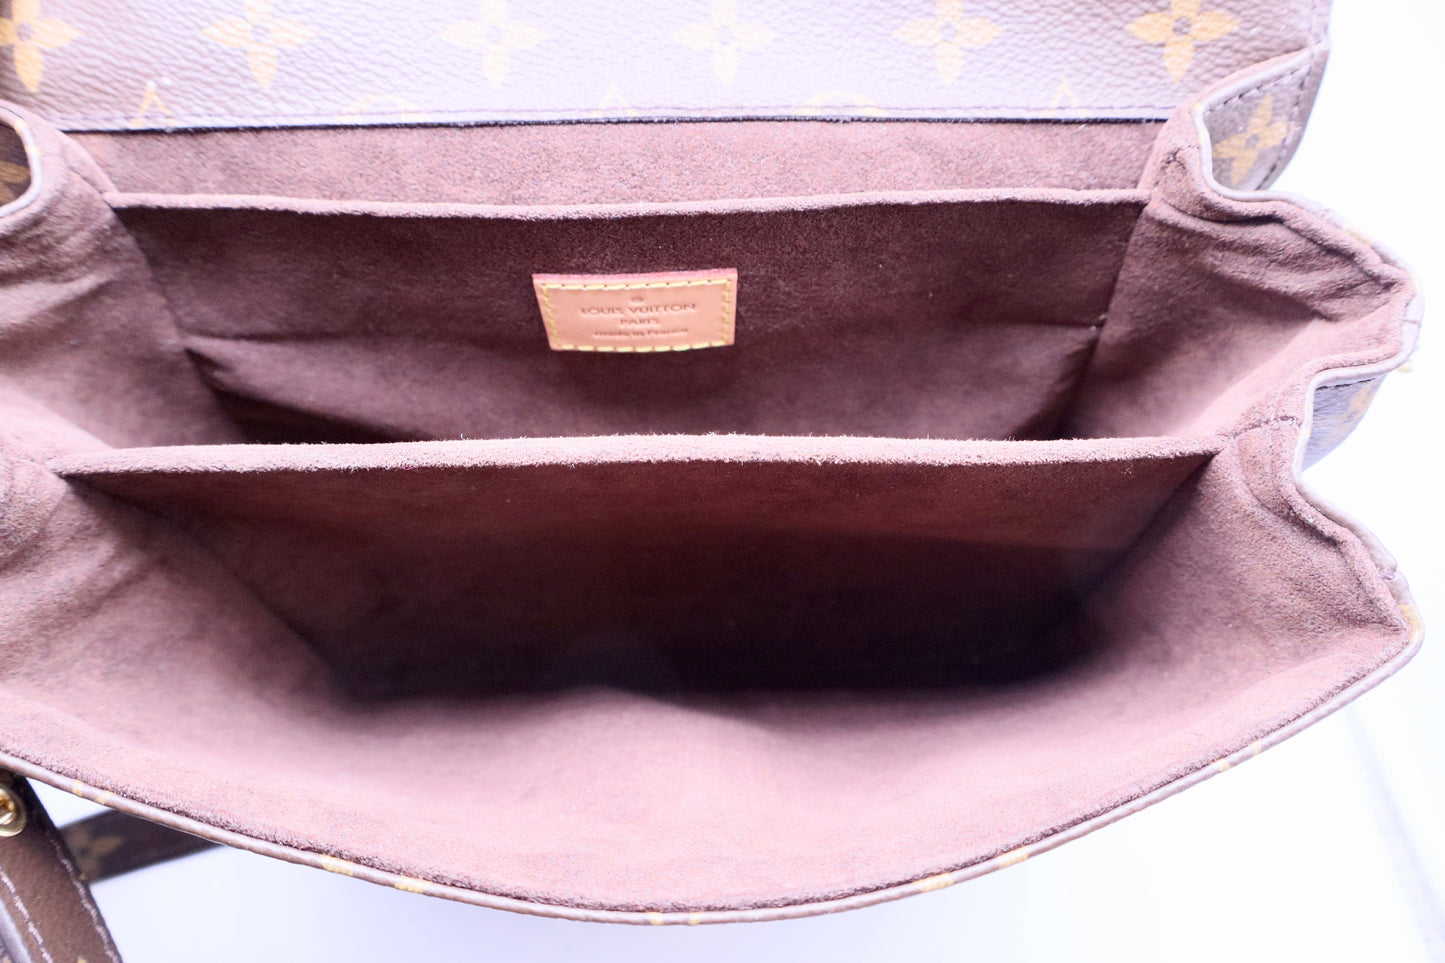 interior of the bag showing 3 pockets